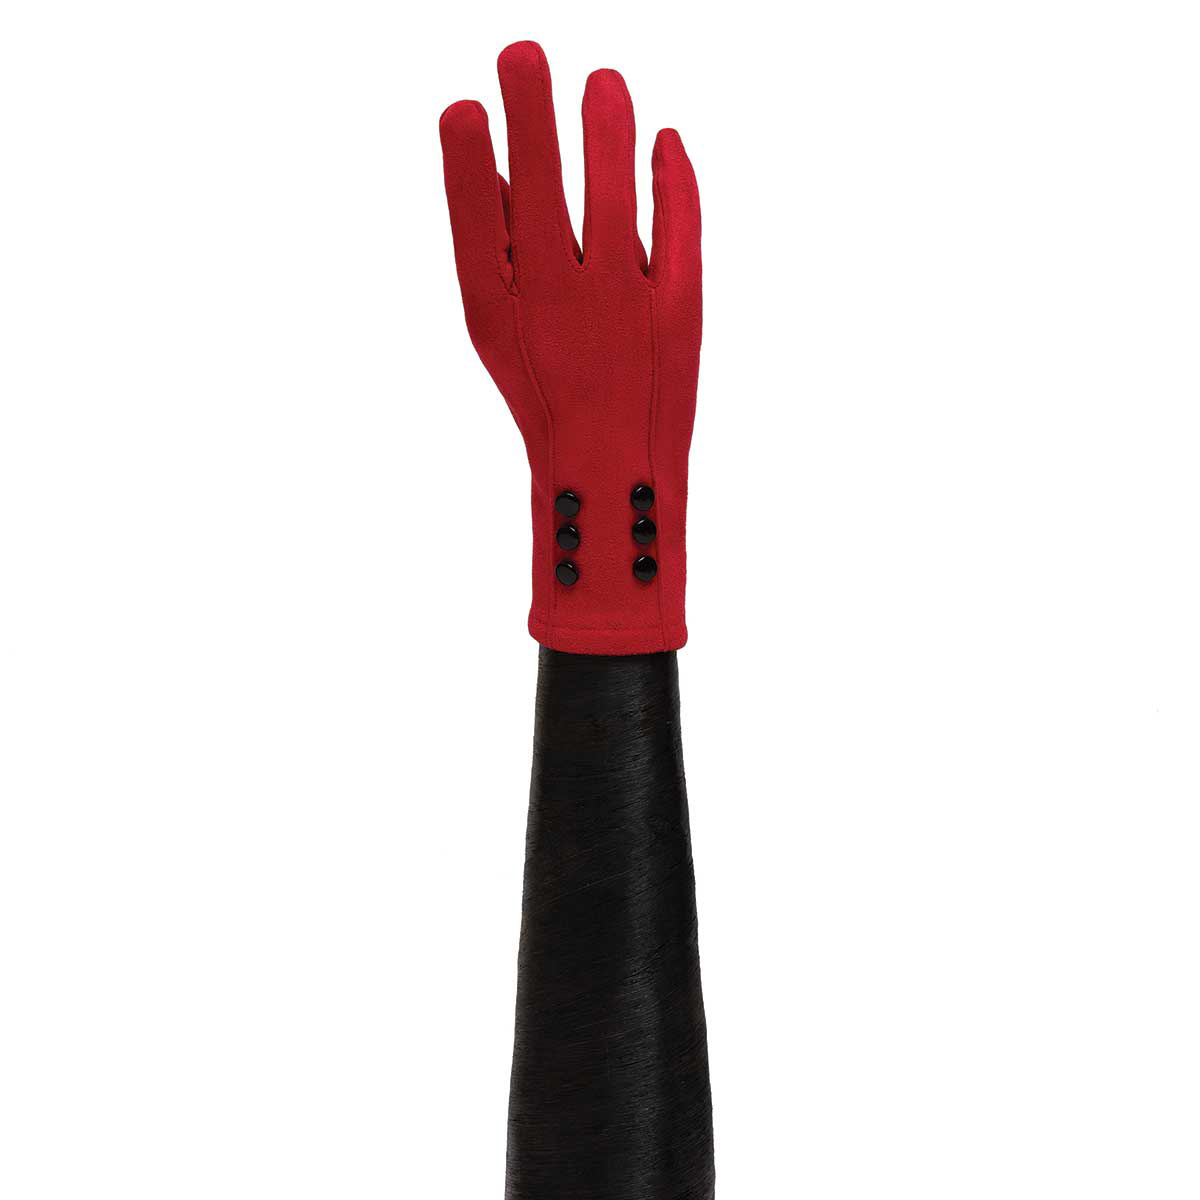 RED GLOVES WITH 6 BLACK BUTTONS